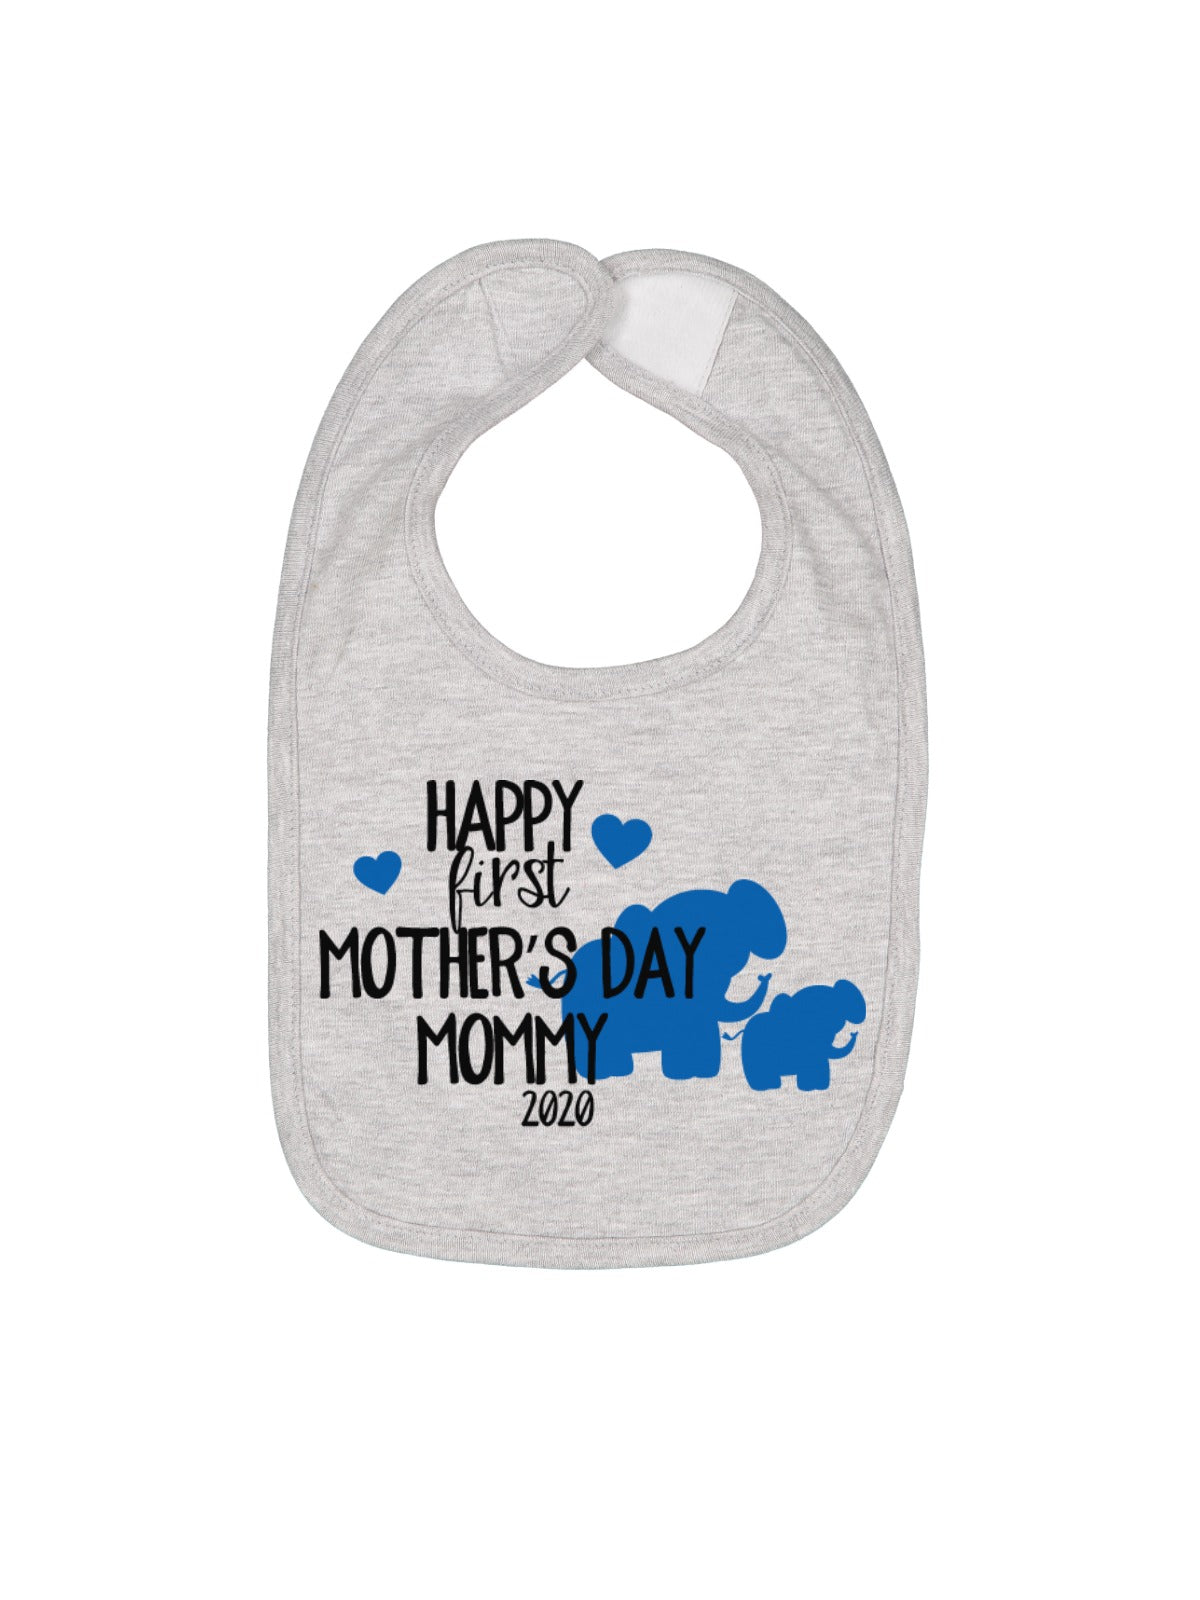 happy first mother's day mommy 2020 baby bib